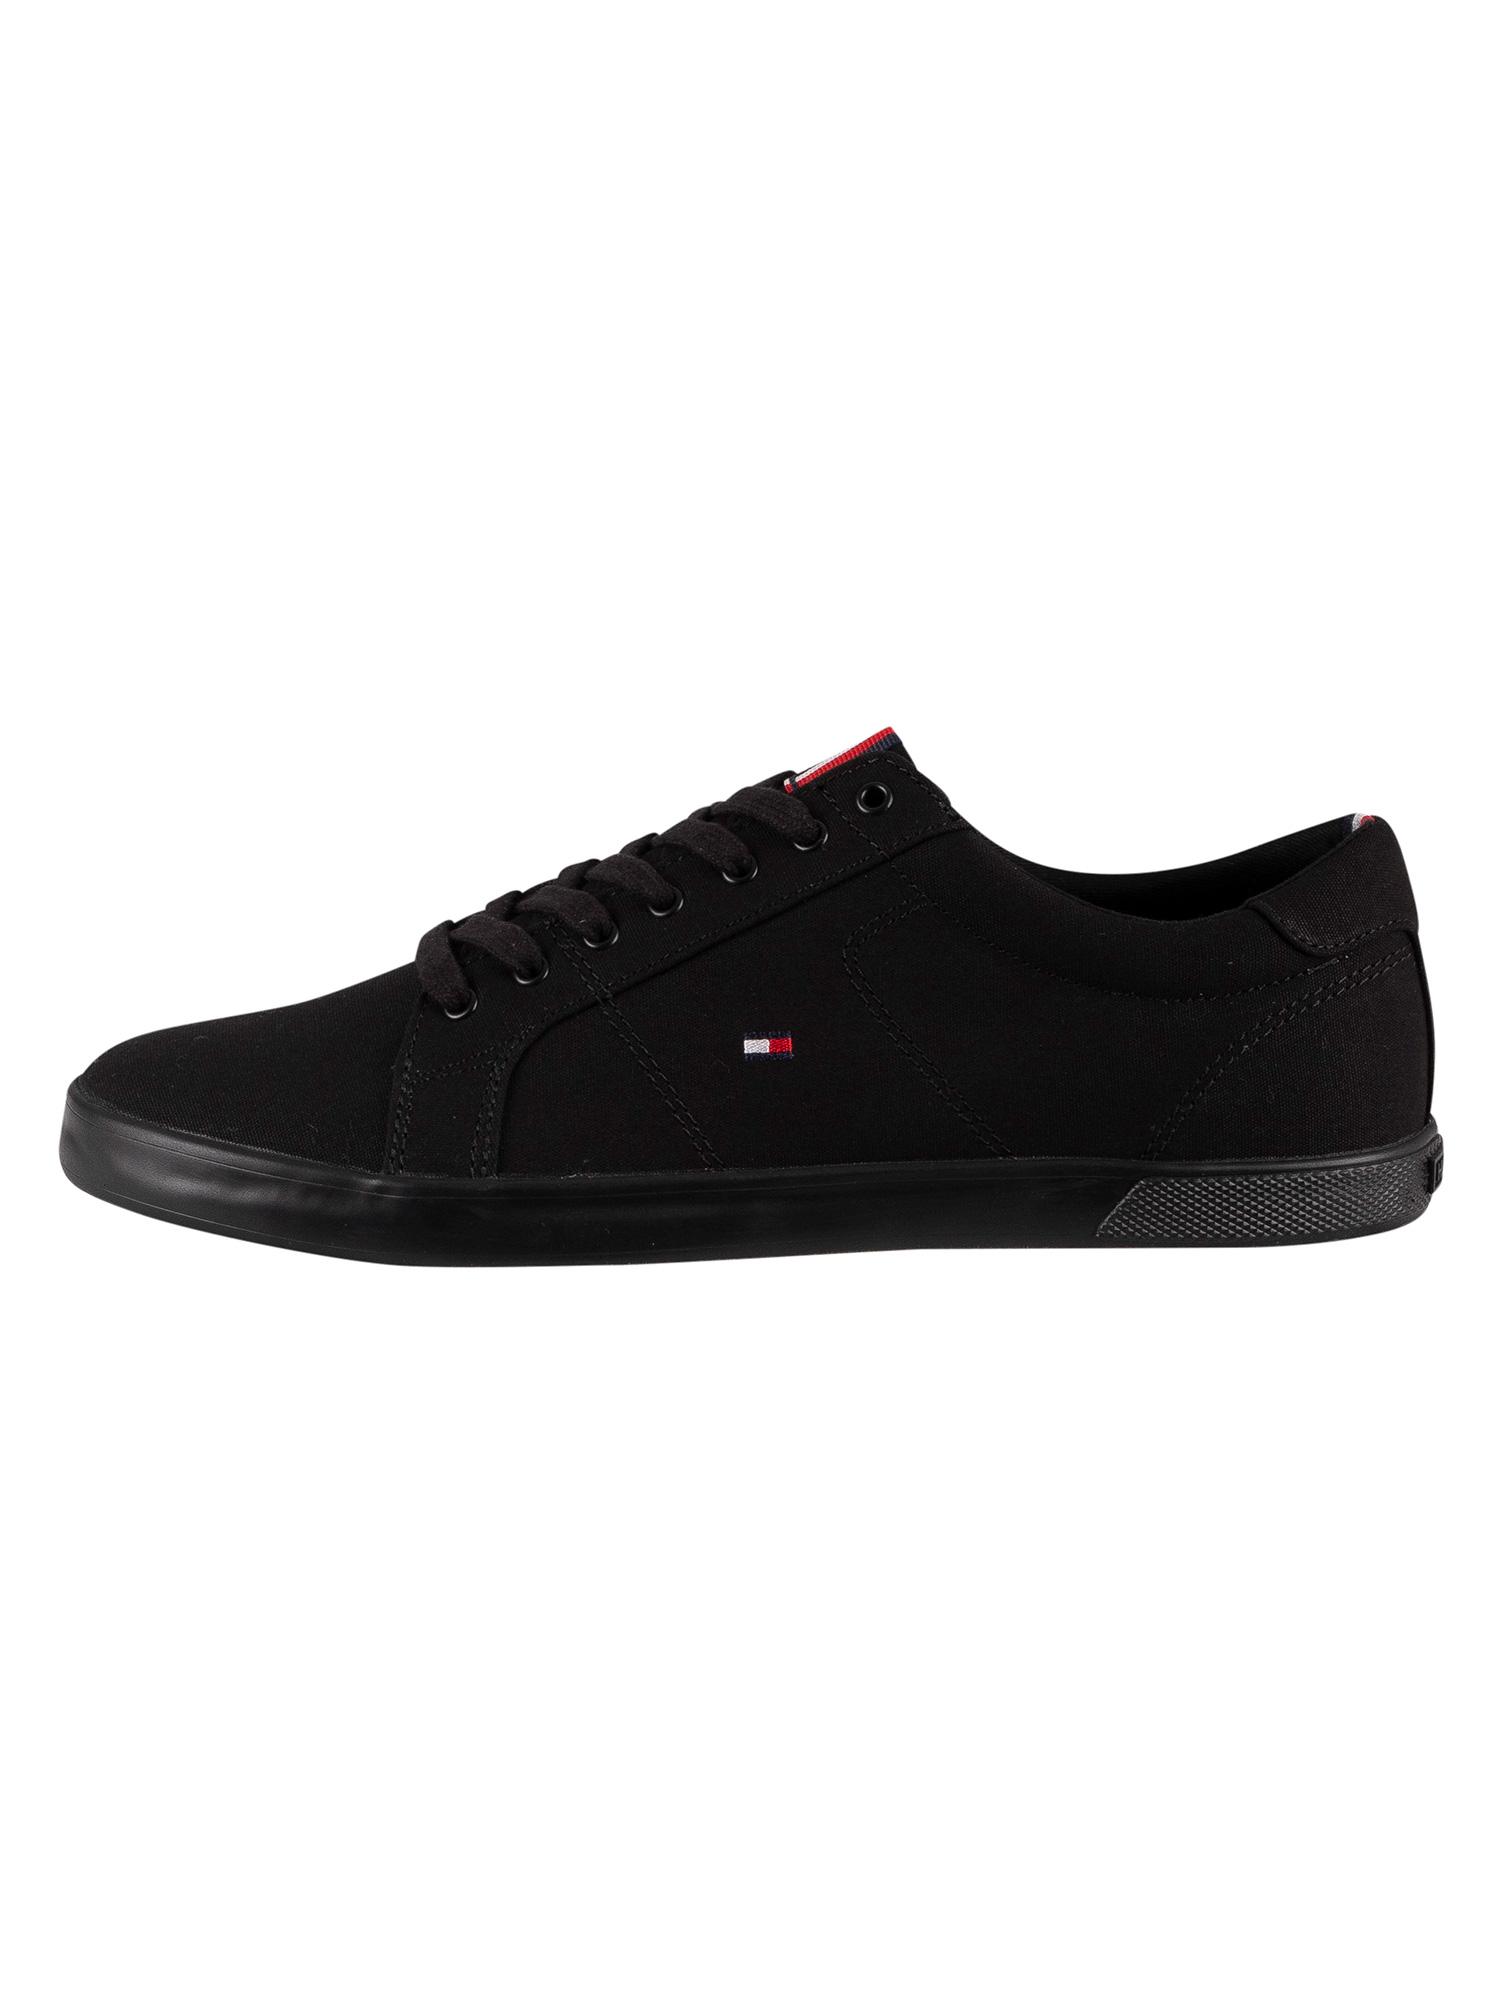 Tommy Hilfiger Harlow Canvas Trainers in Black/Black (Black) for Men | Lyst